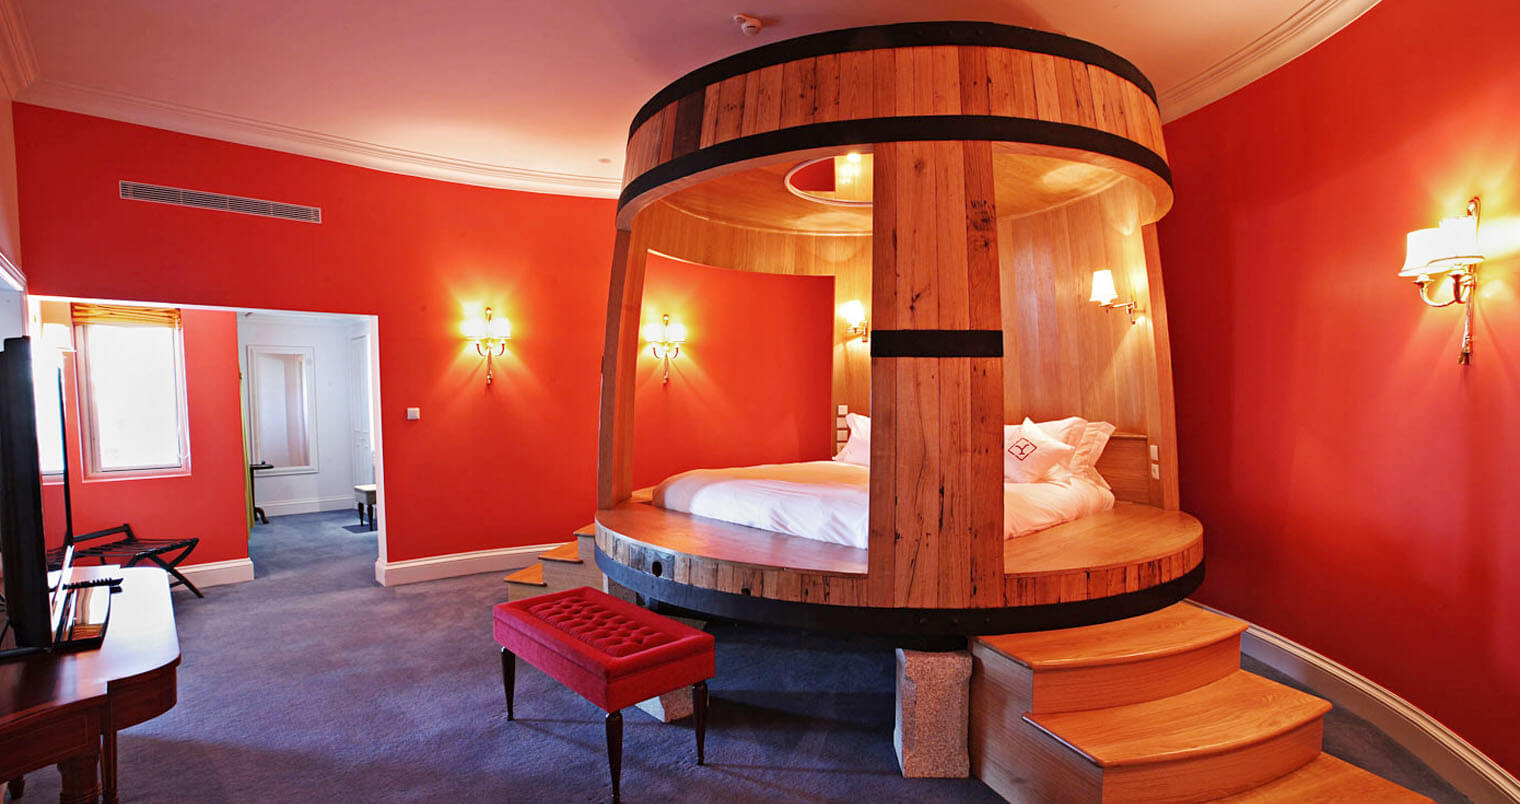 Wine Barrel Bed at The Yeatman Hotel Master Suite featured image